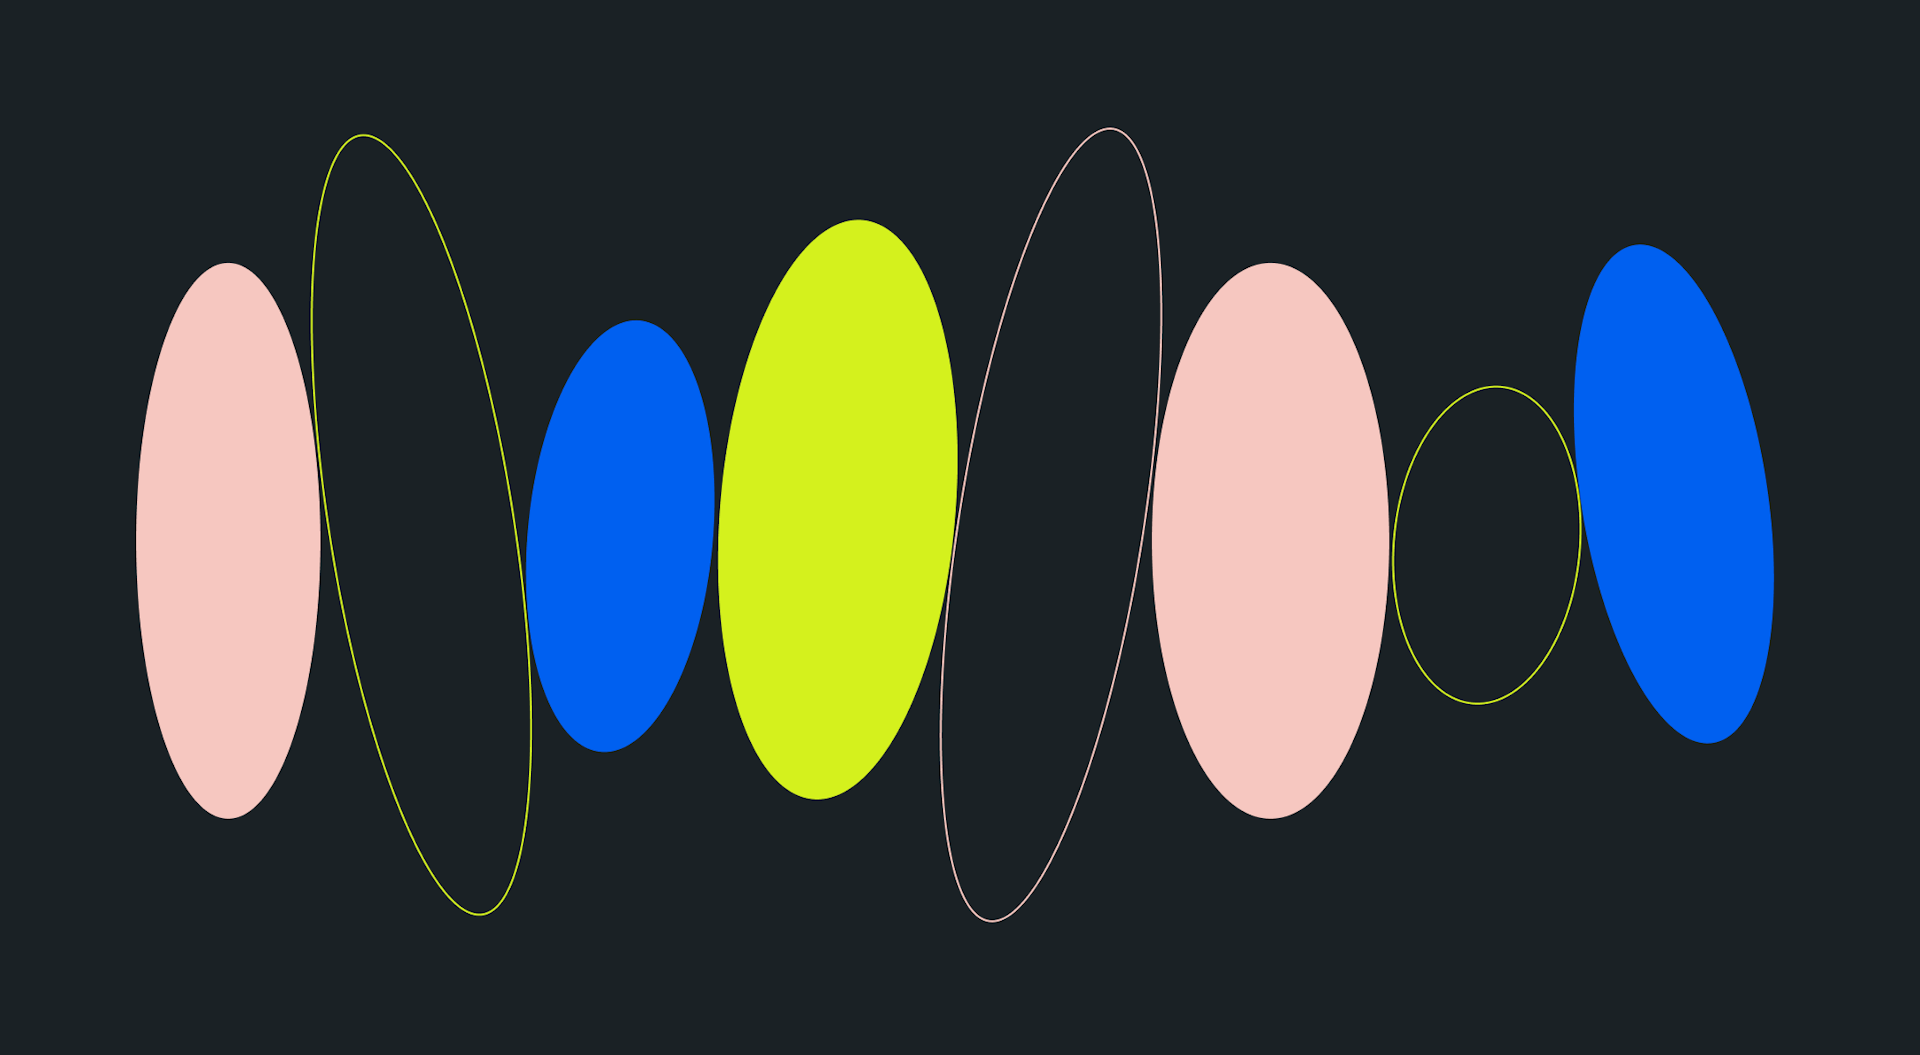 Blue, green, and peach circles on a dark background